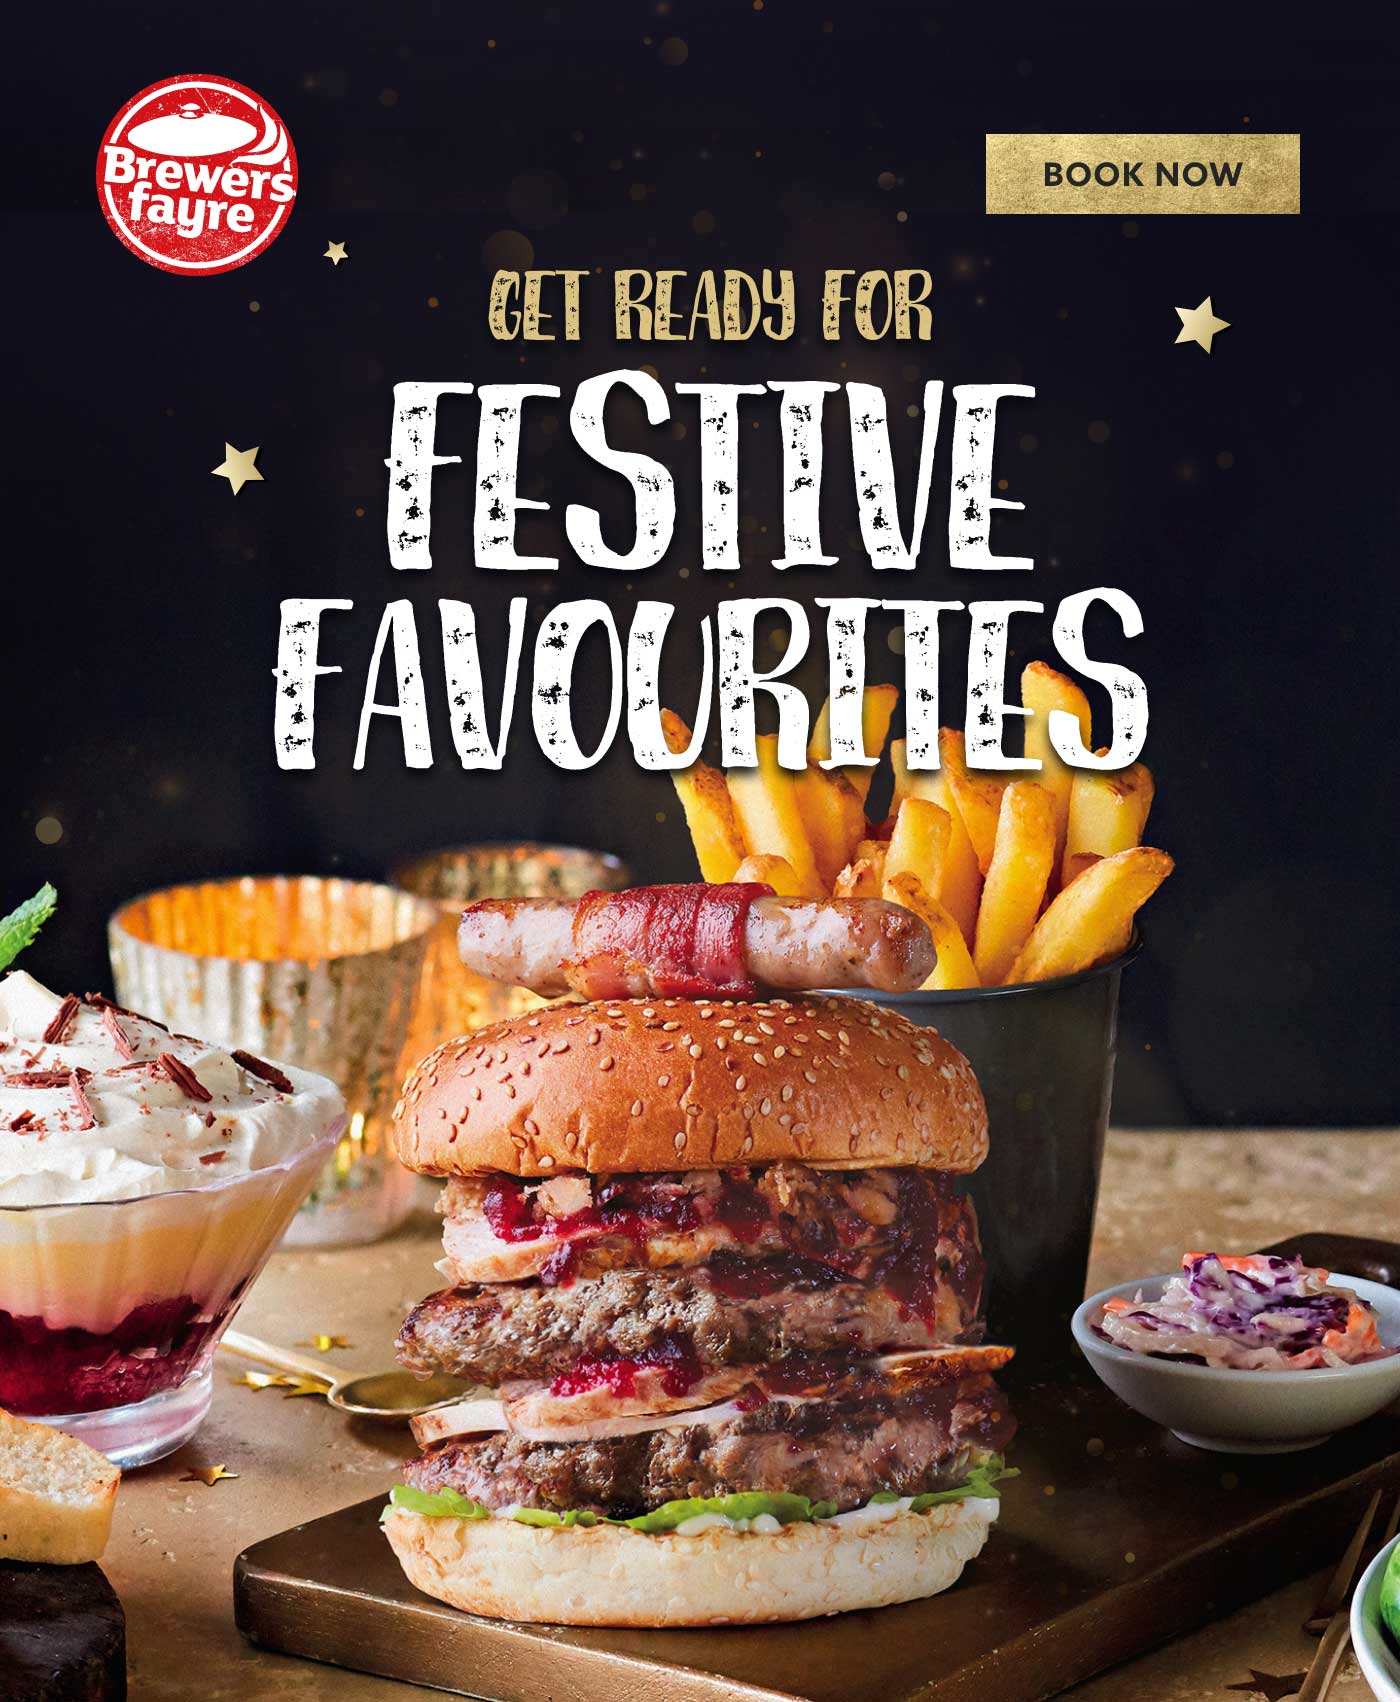 GET READY FOR FESTIVE FAVOURITES